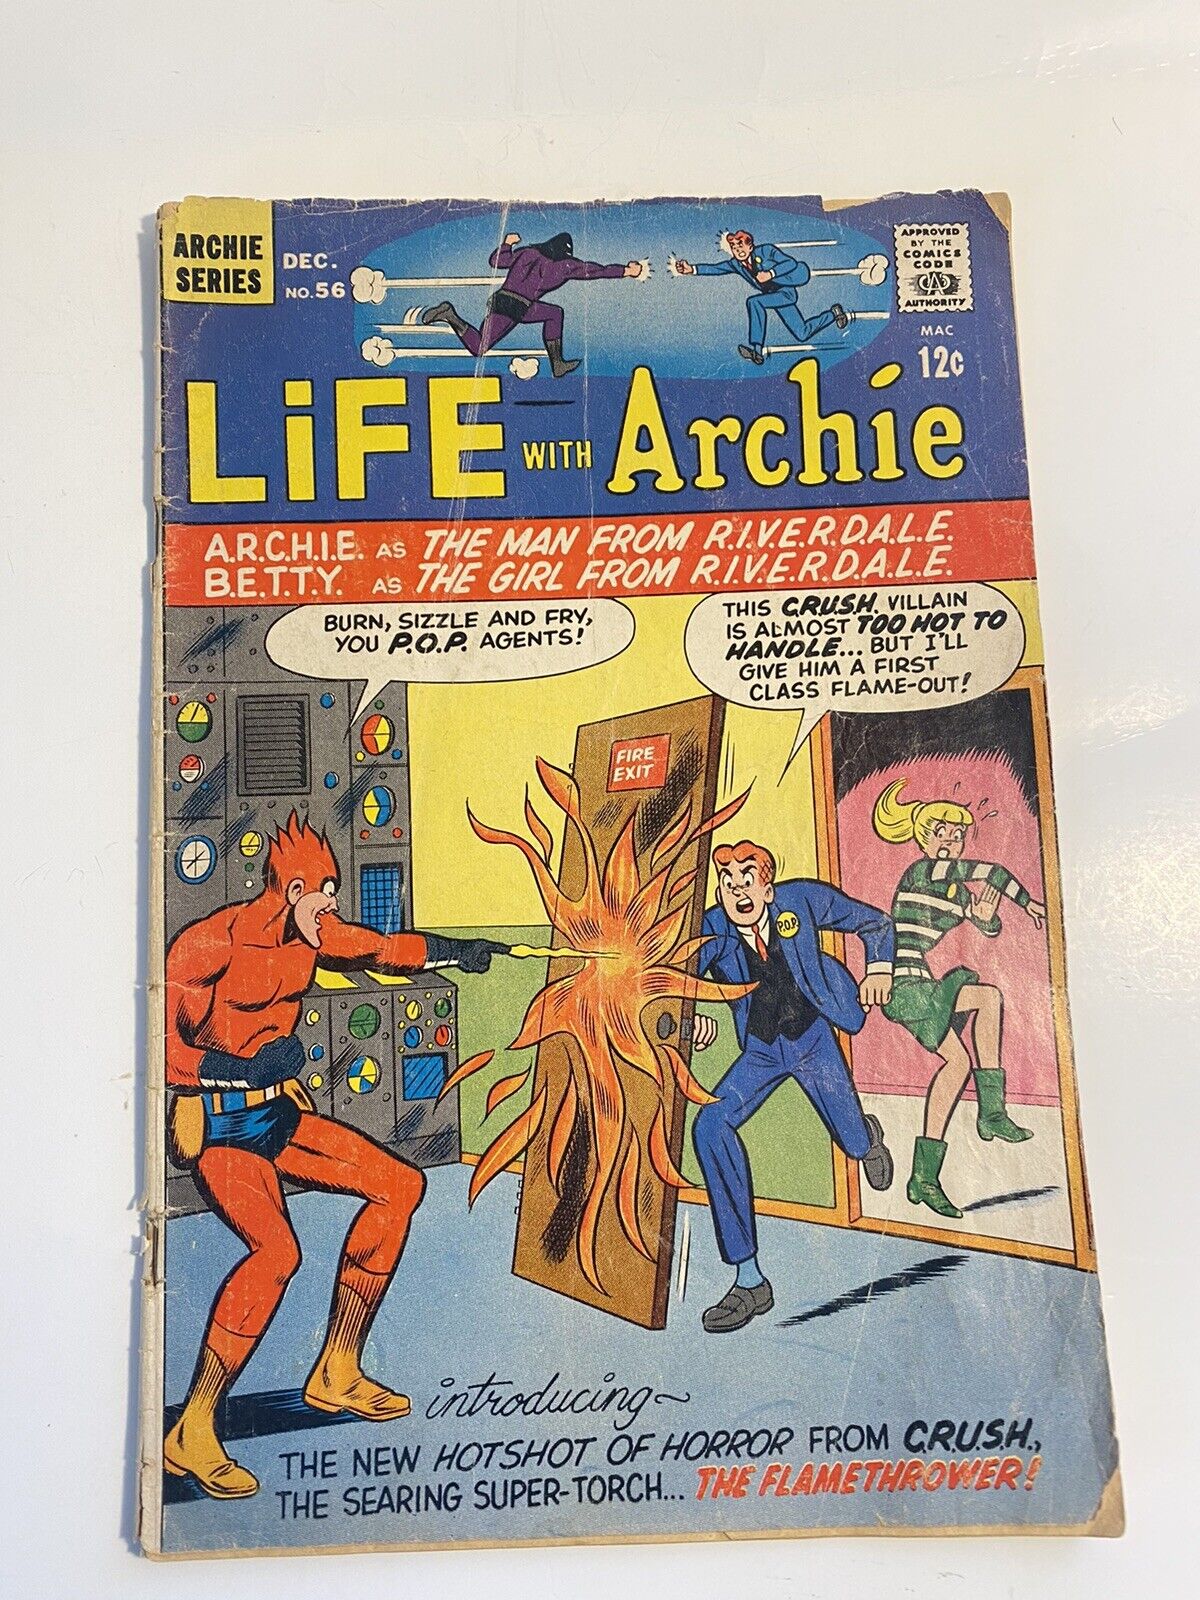 Vintage Archie Series, Life With Archie, Dec. 1966 No. 56 flamethrower first ap